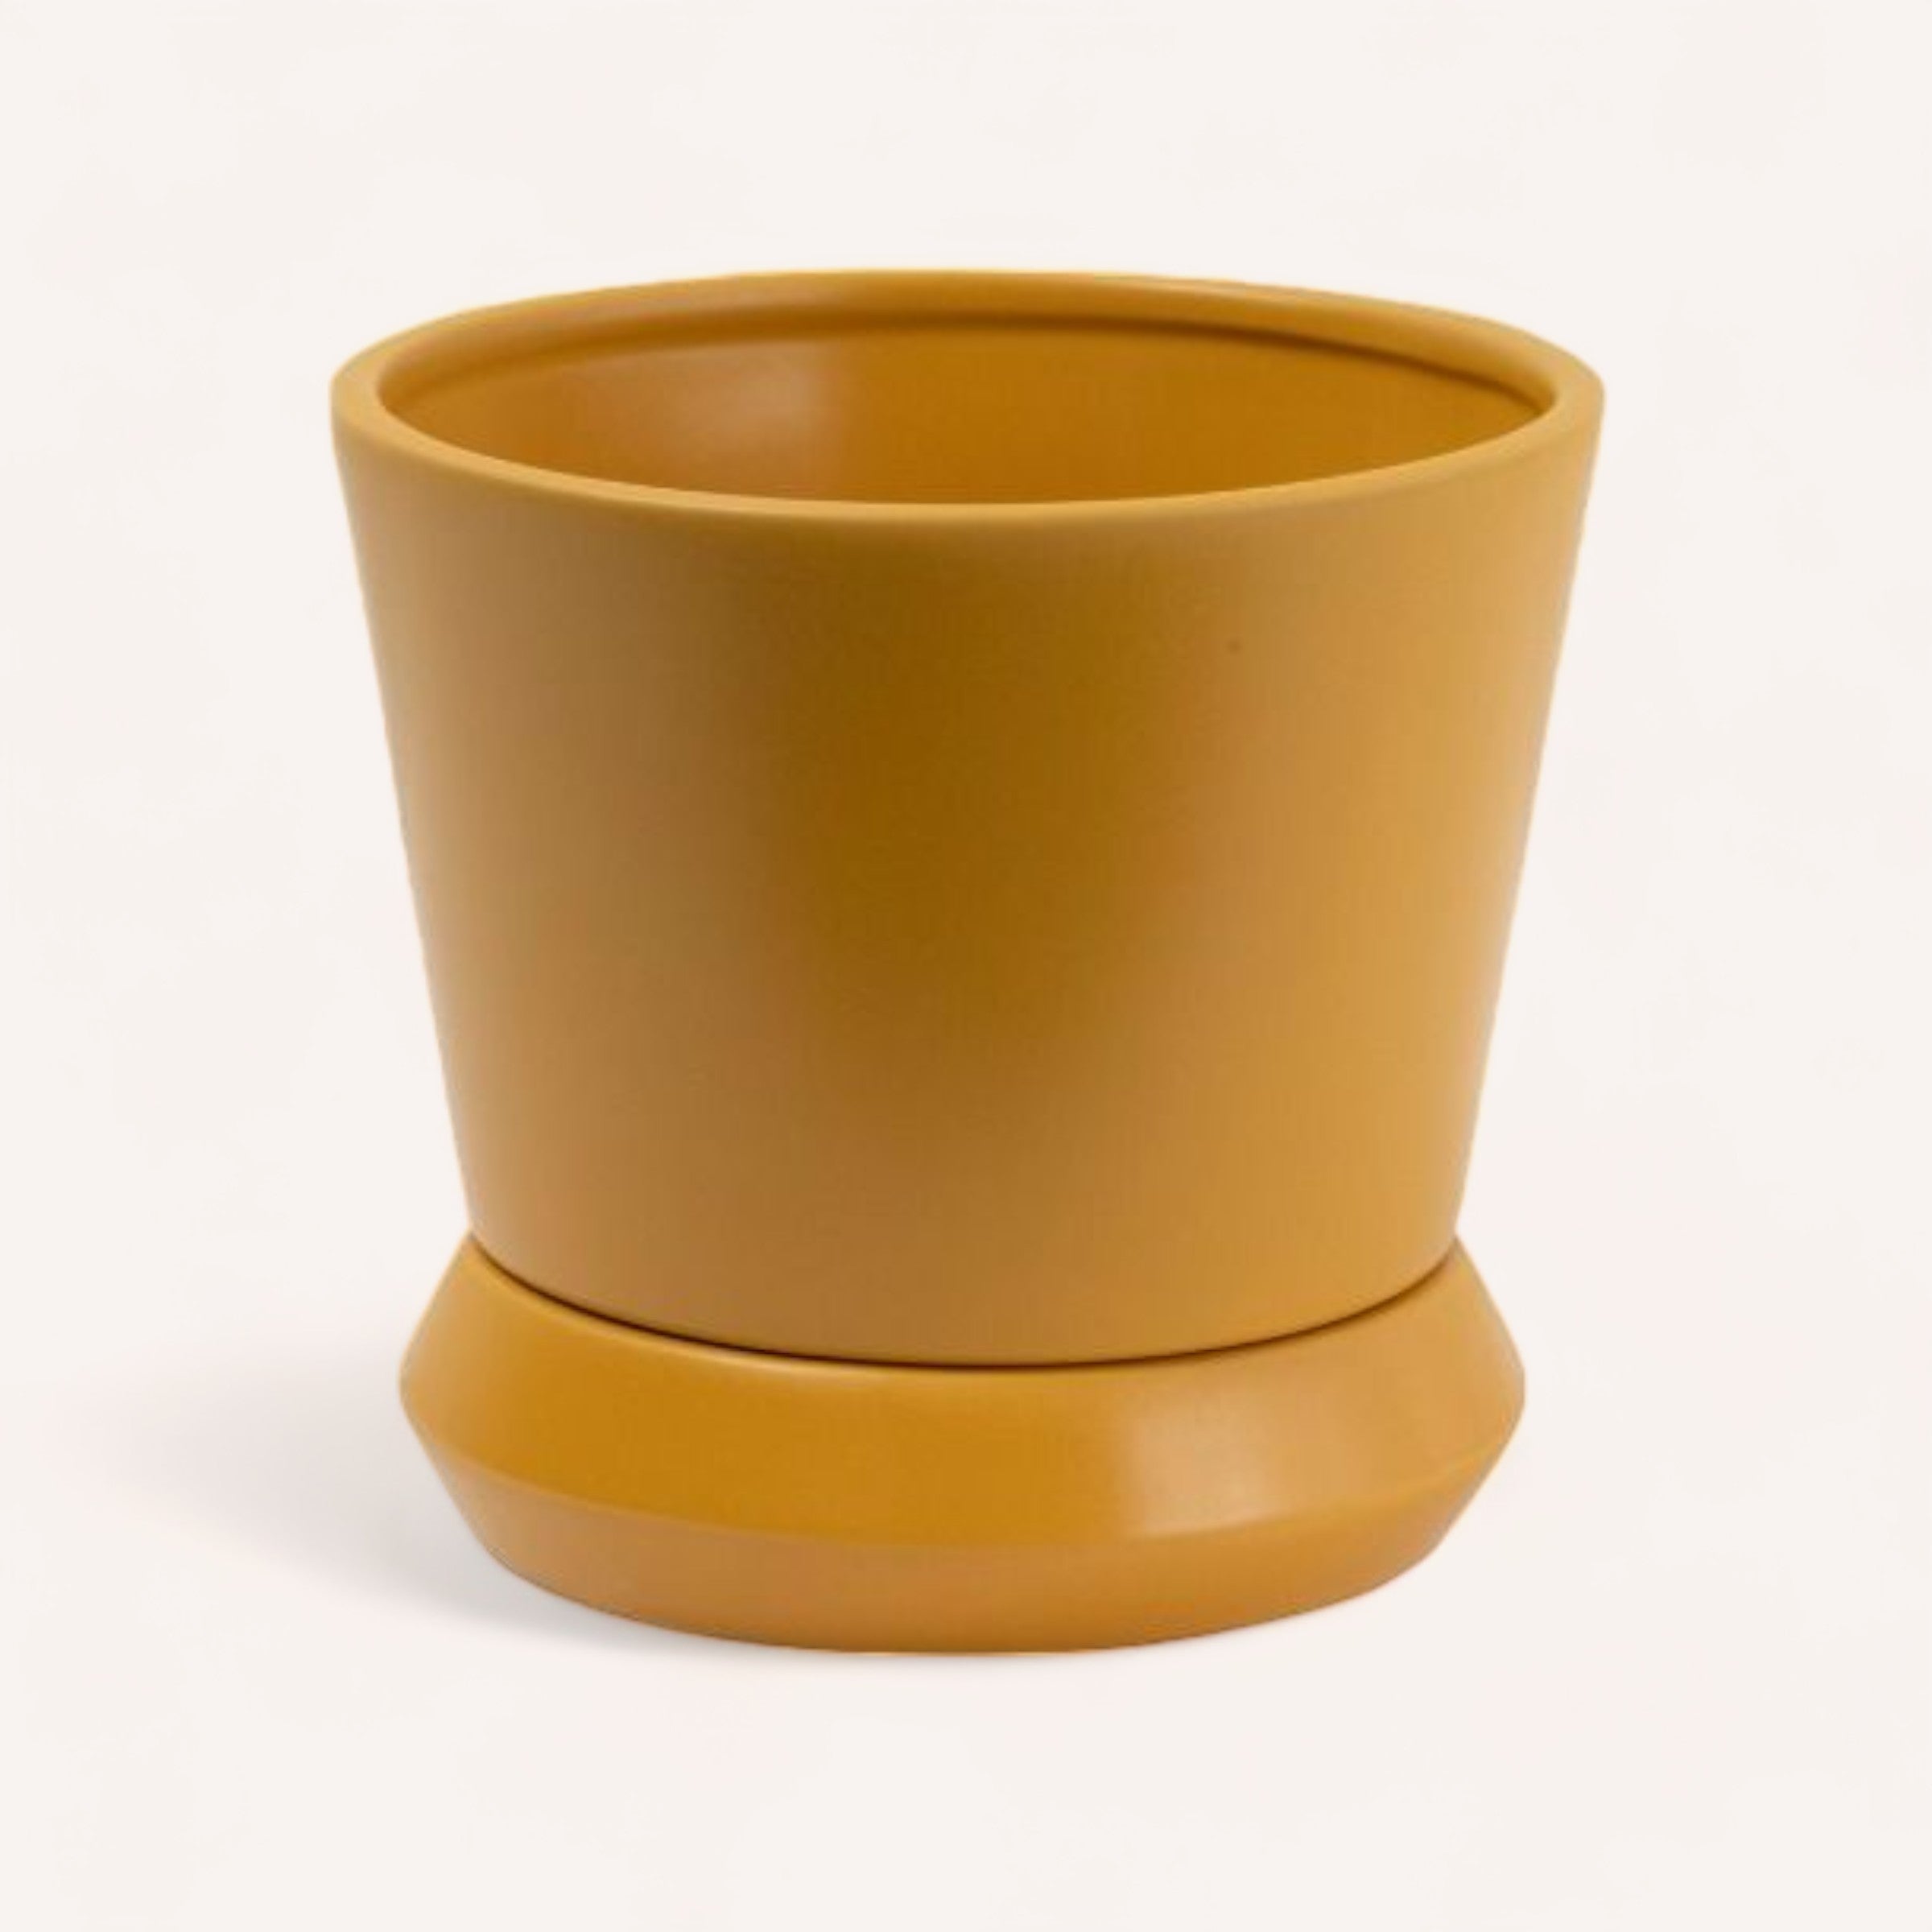 A simple Hamburg Planter by PottedNZ in terracotta color stoneware with a matching saucer and a drainage hole, set against a white background.